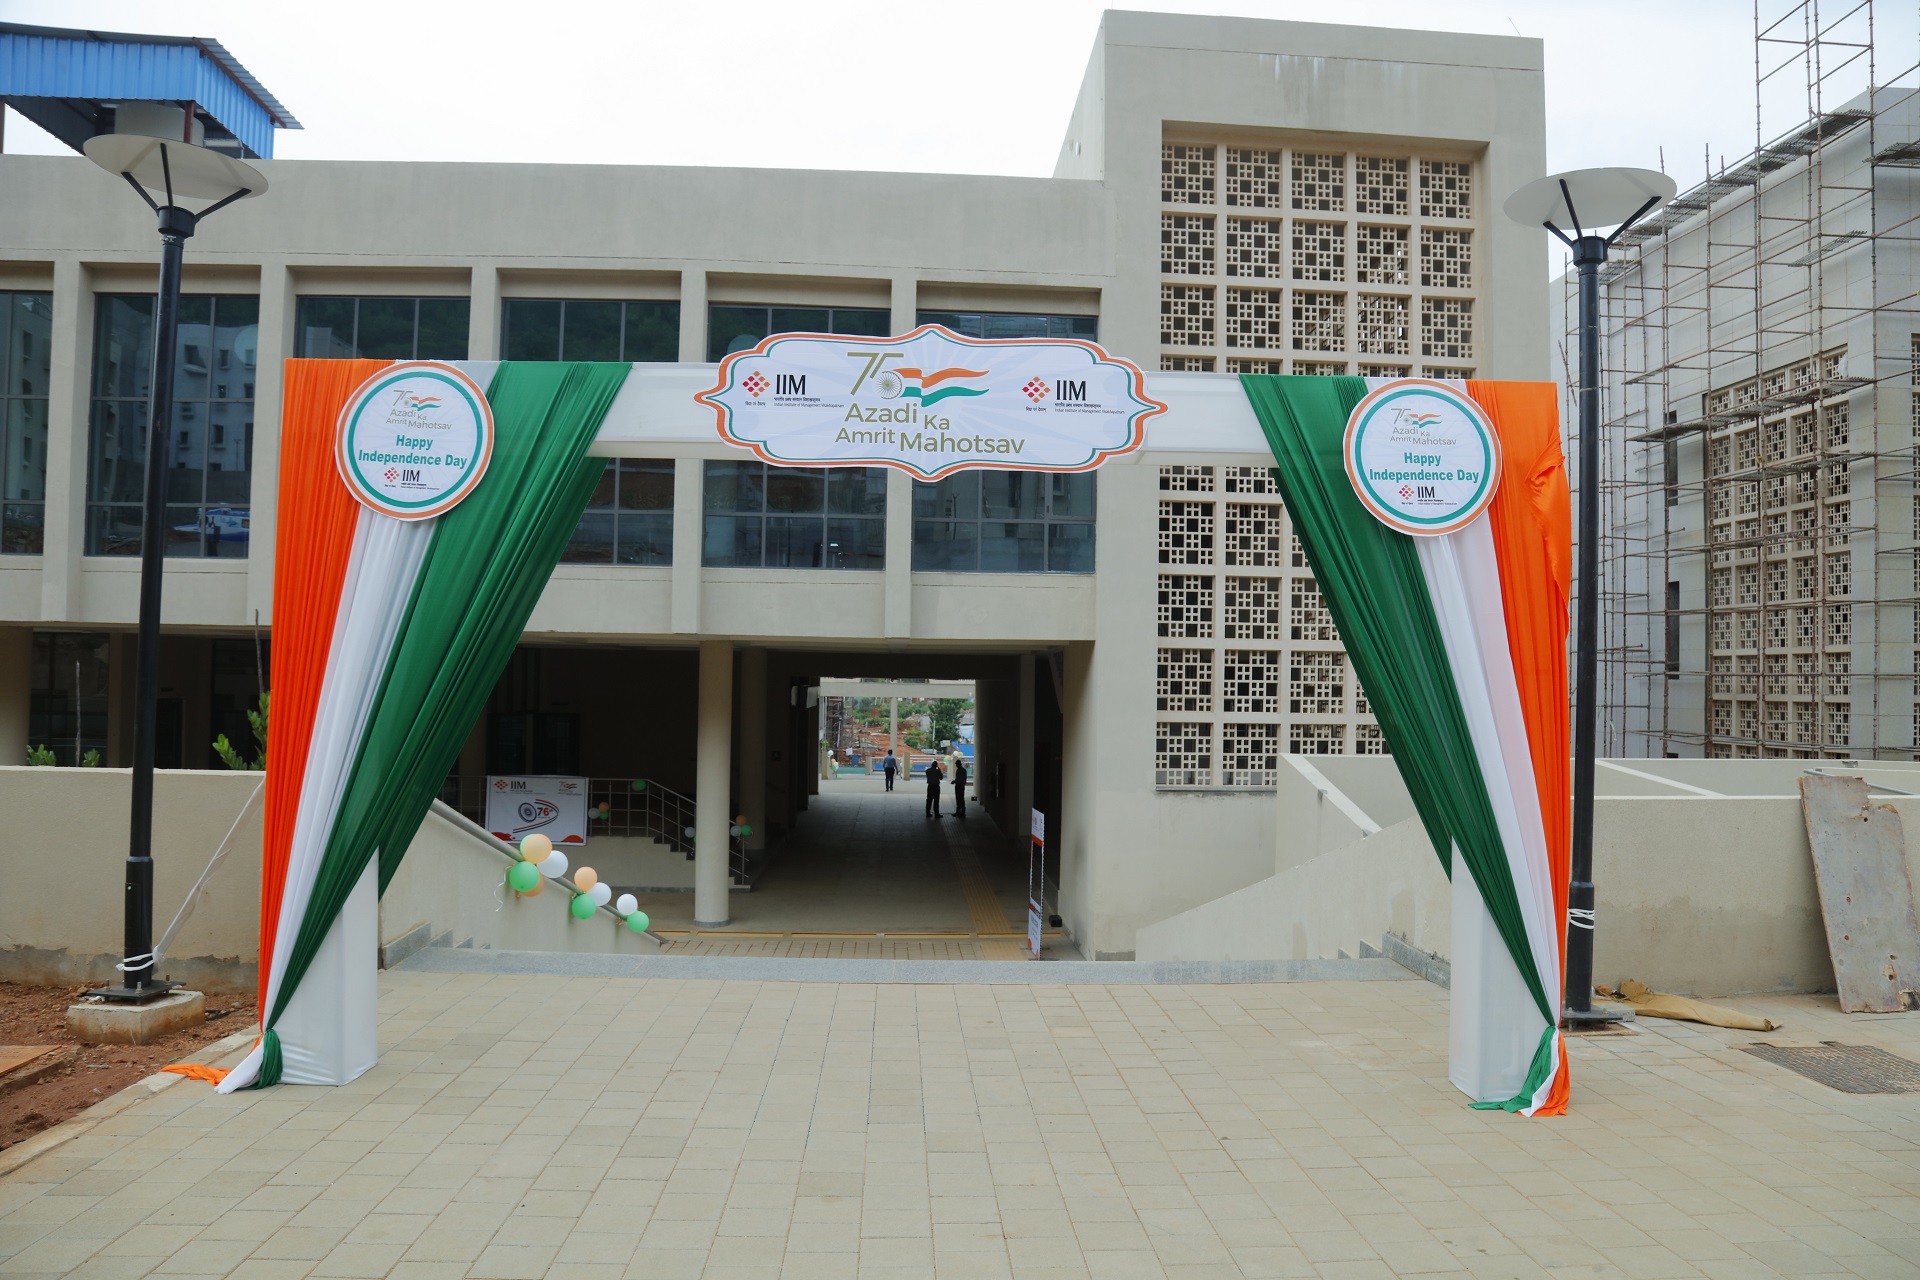 76th Independence Day Celebrations